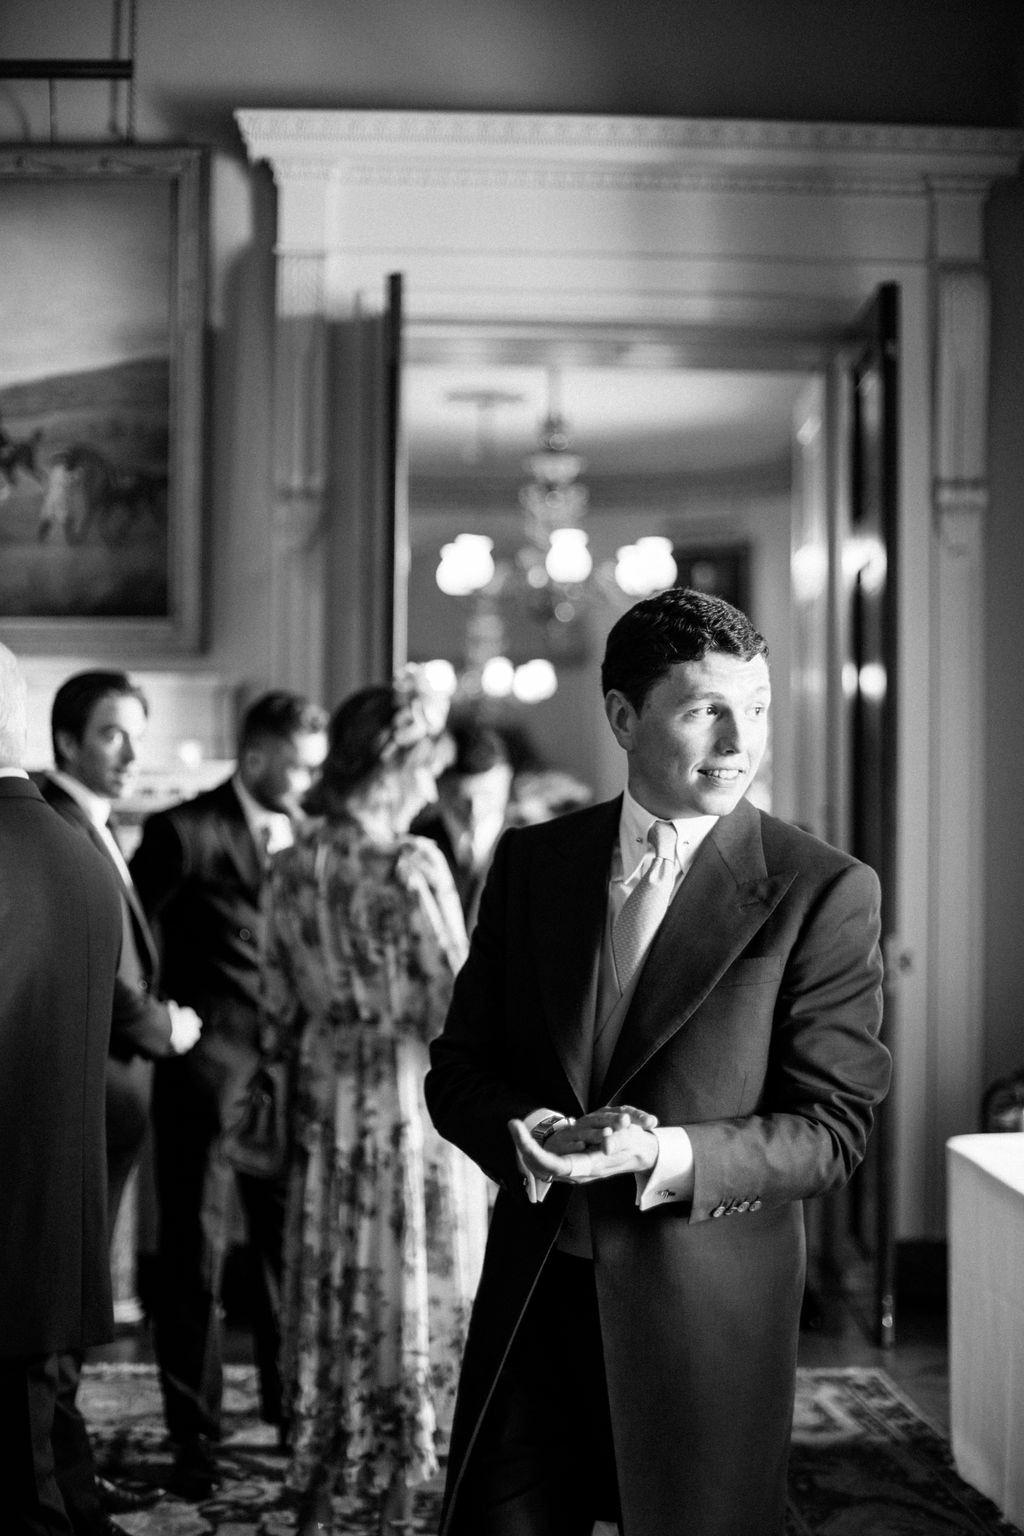 wedding ceremony at Goodwood House